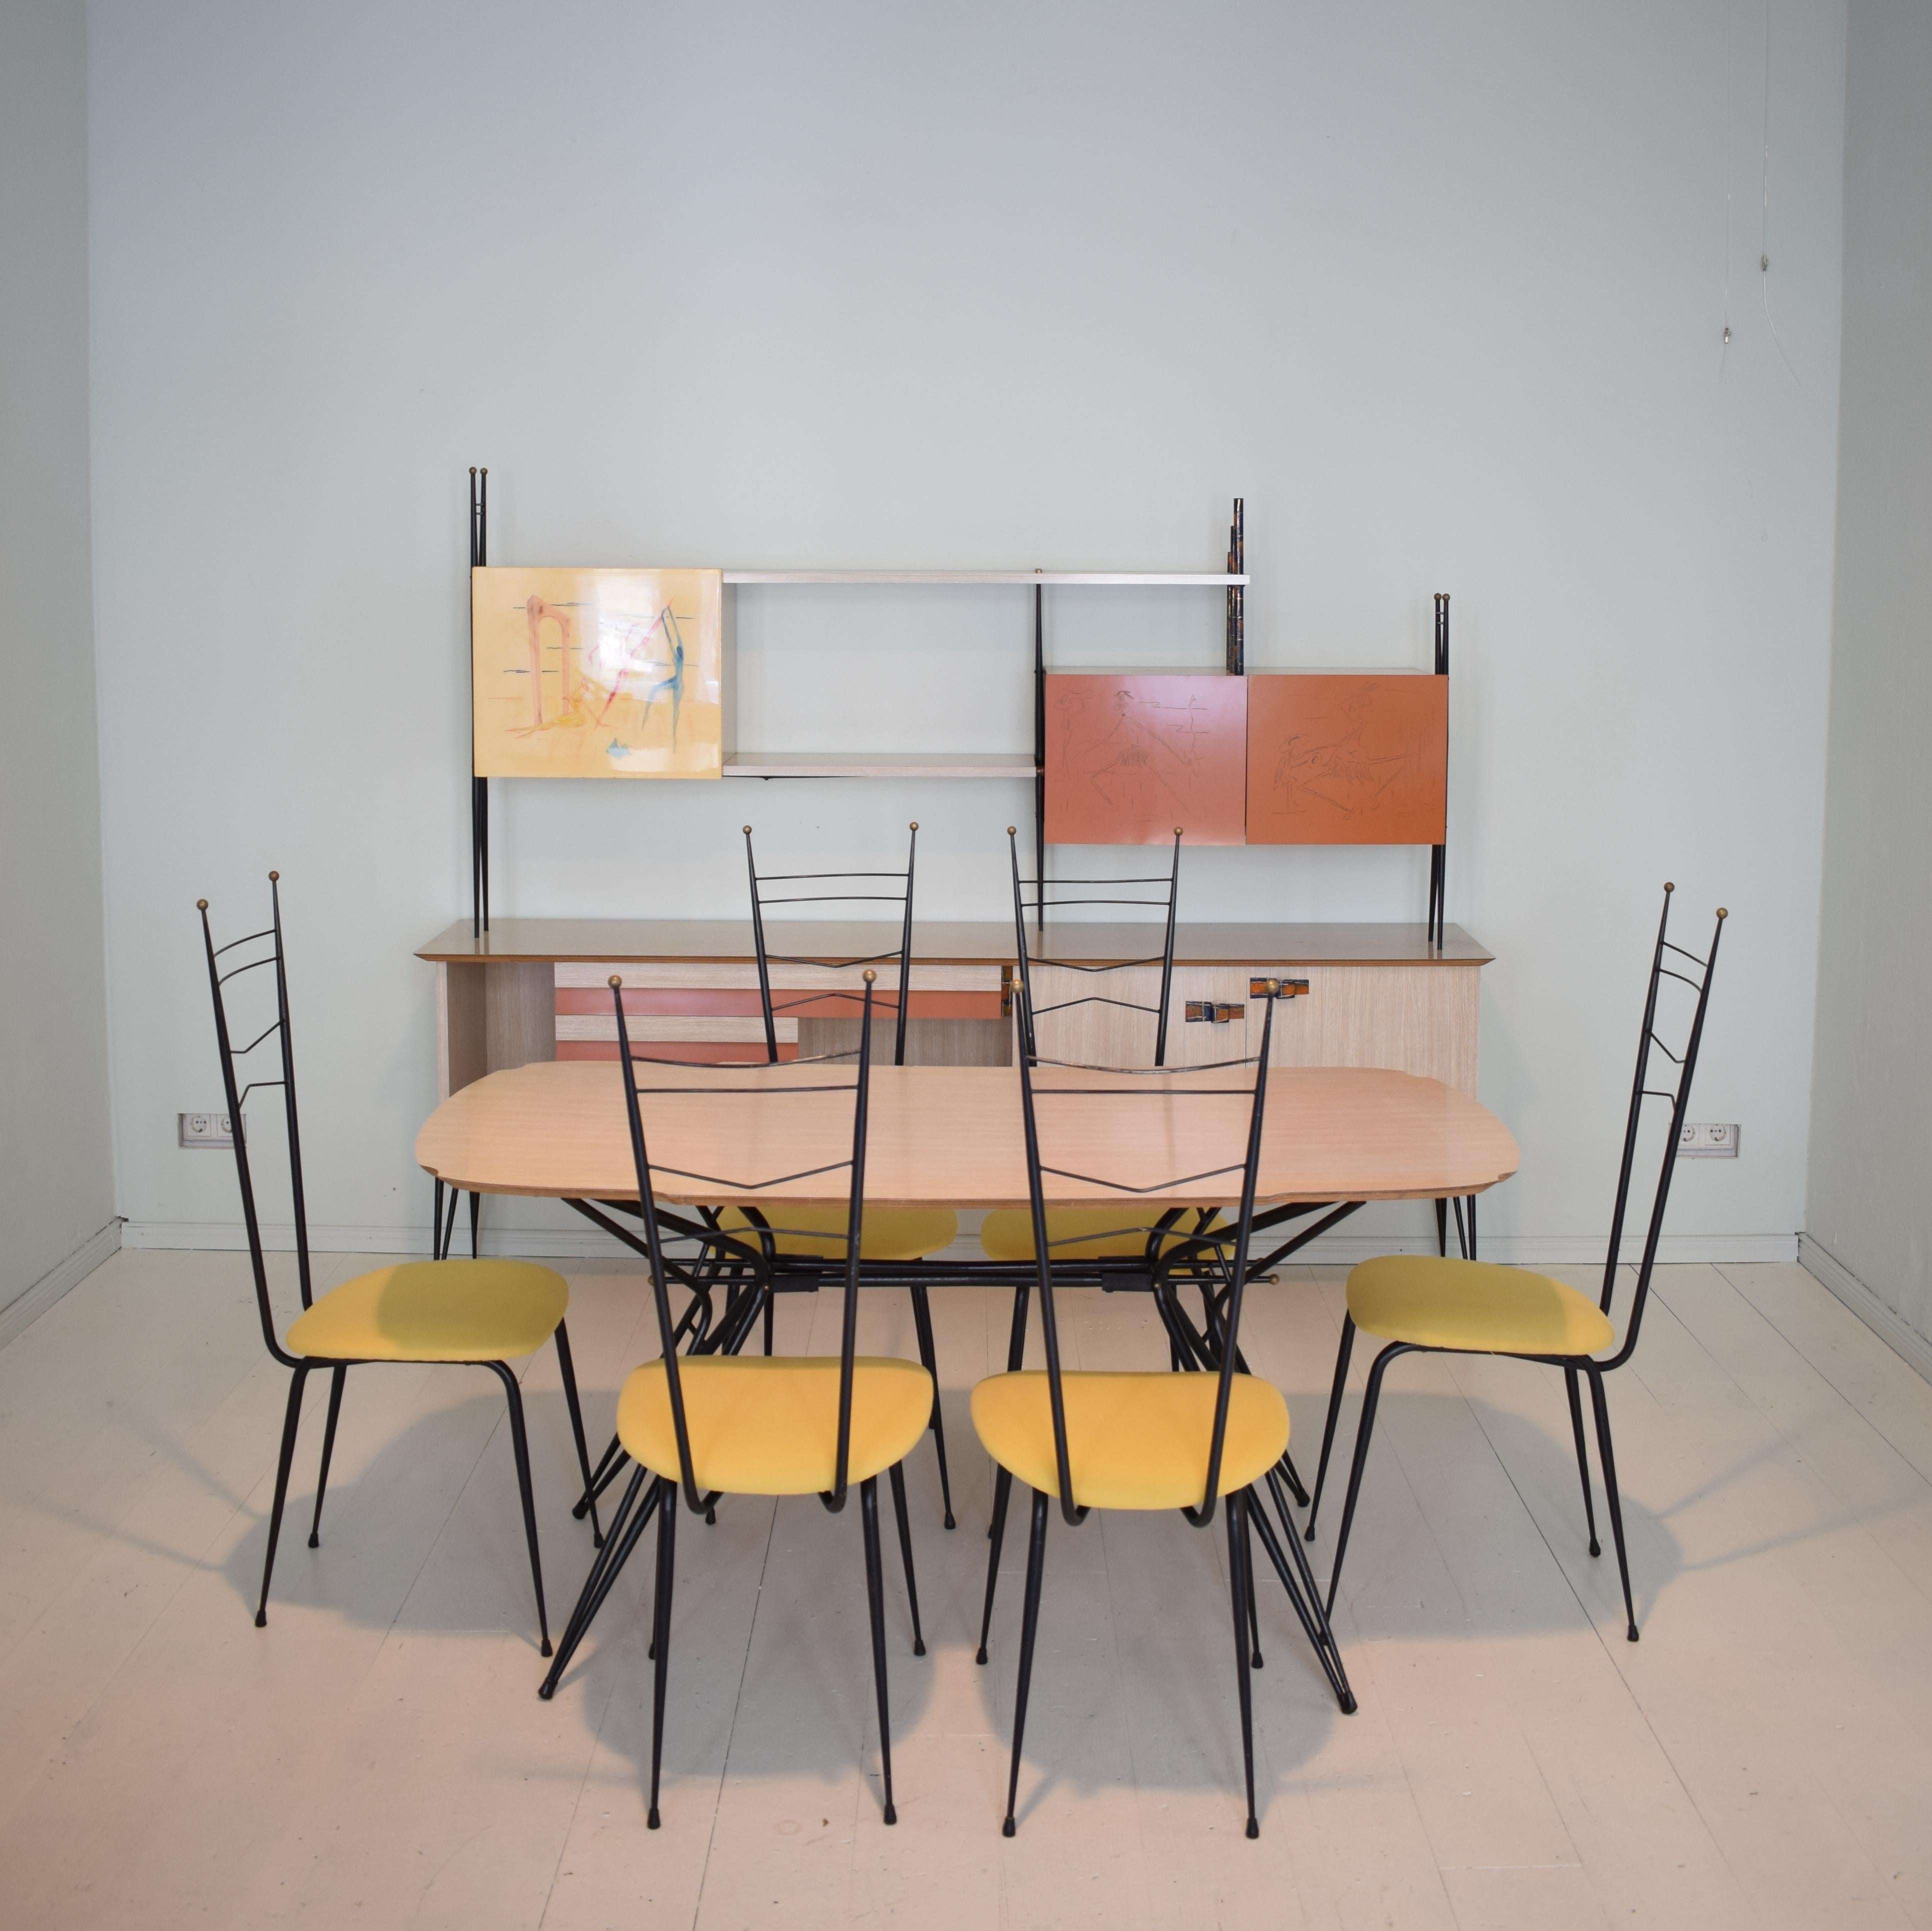 Mid-20th Century Midcentury Italian Black and Yellow Dining Chairs Attributed to Ico Parisi, 1958